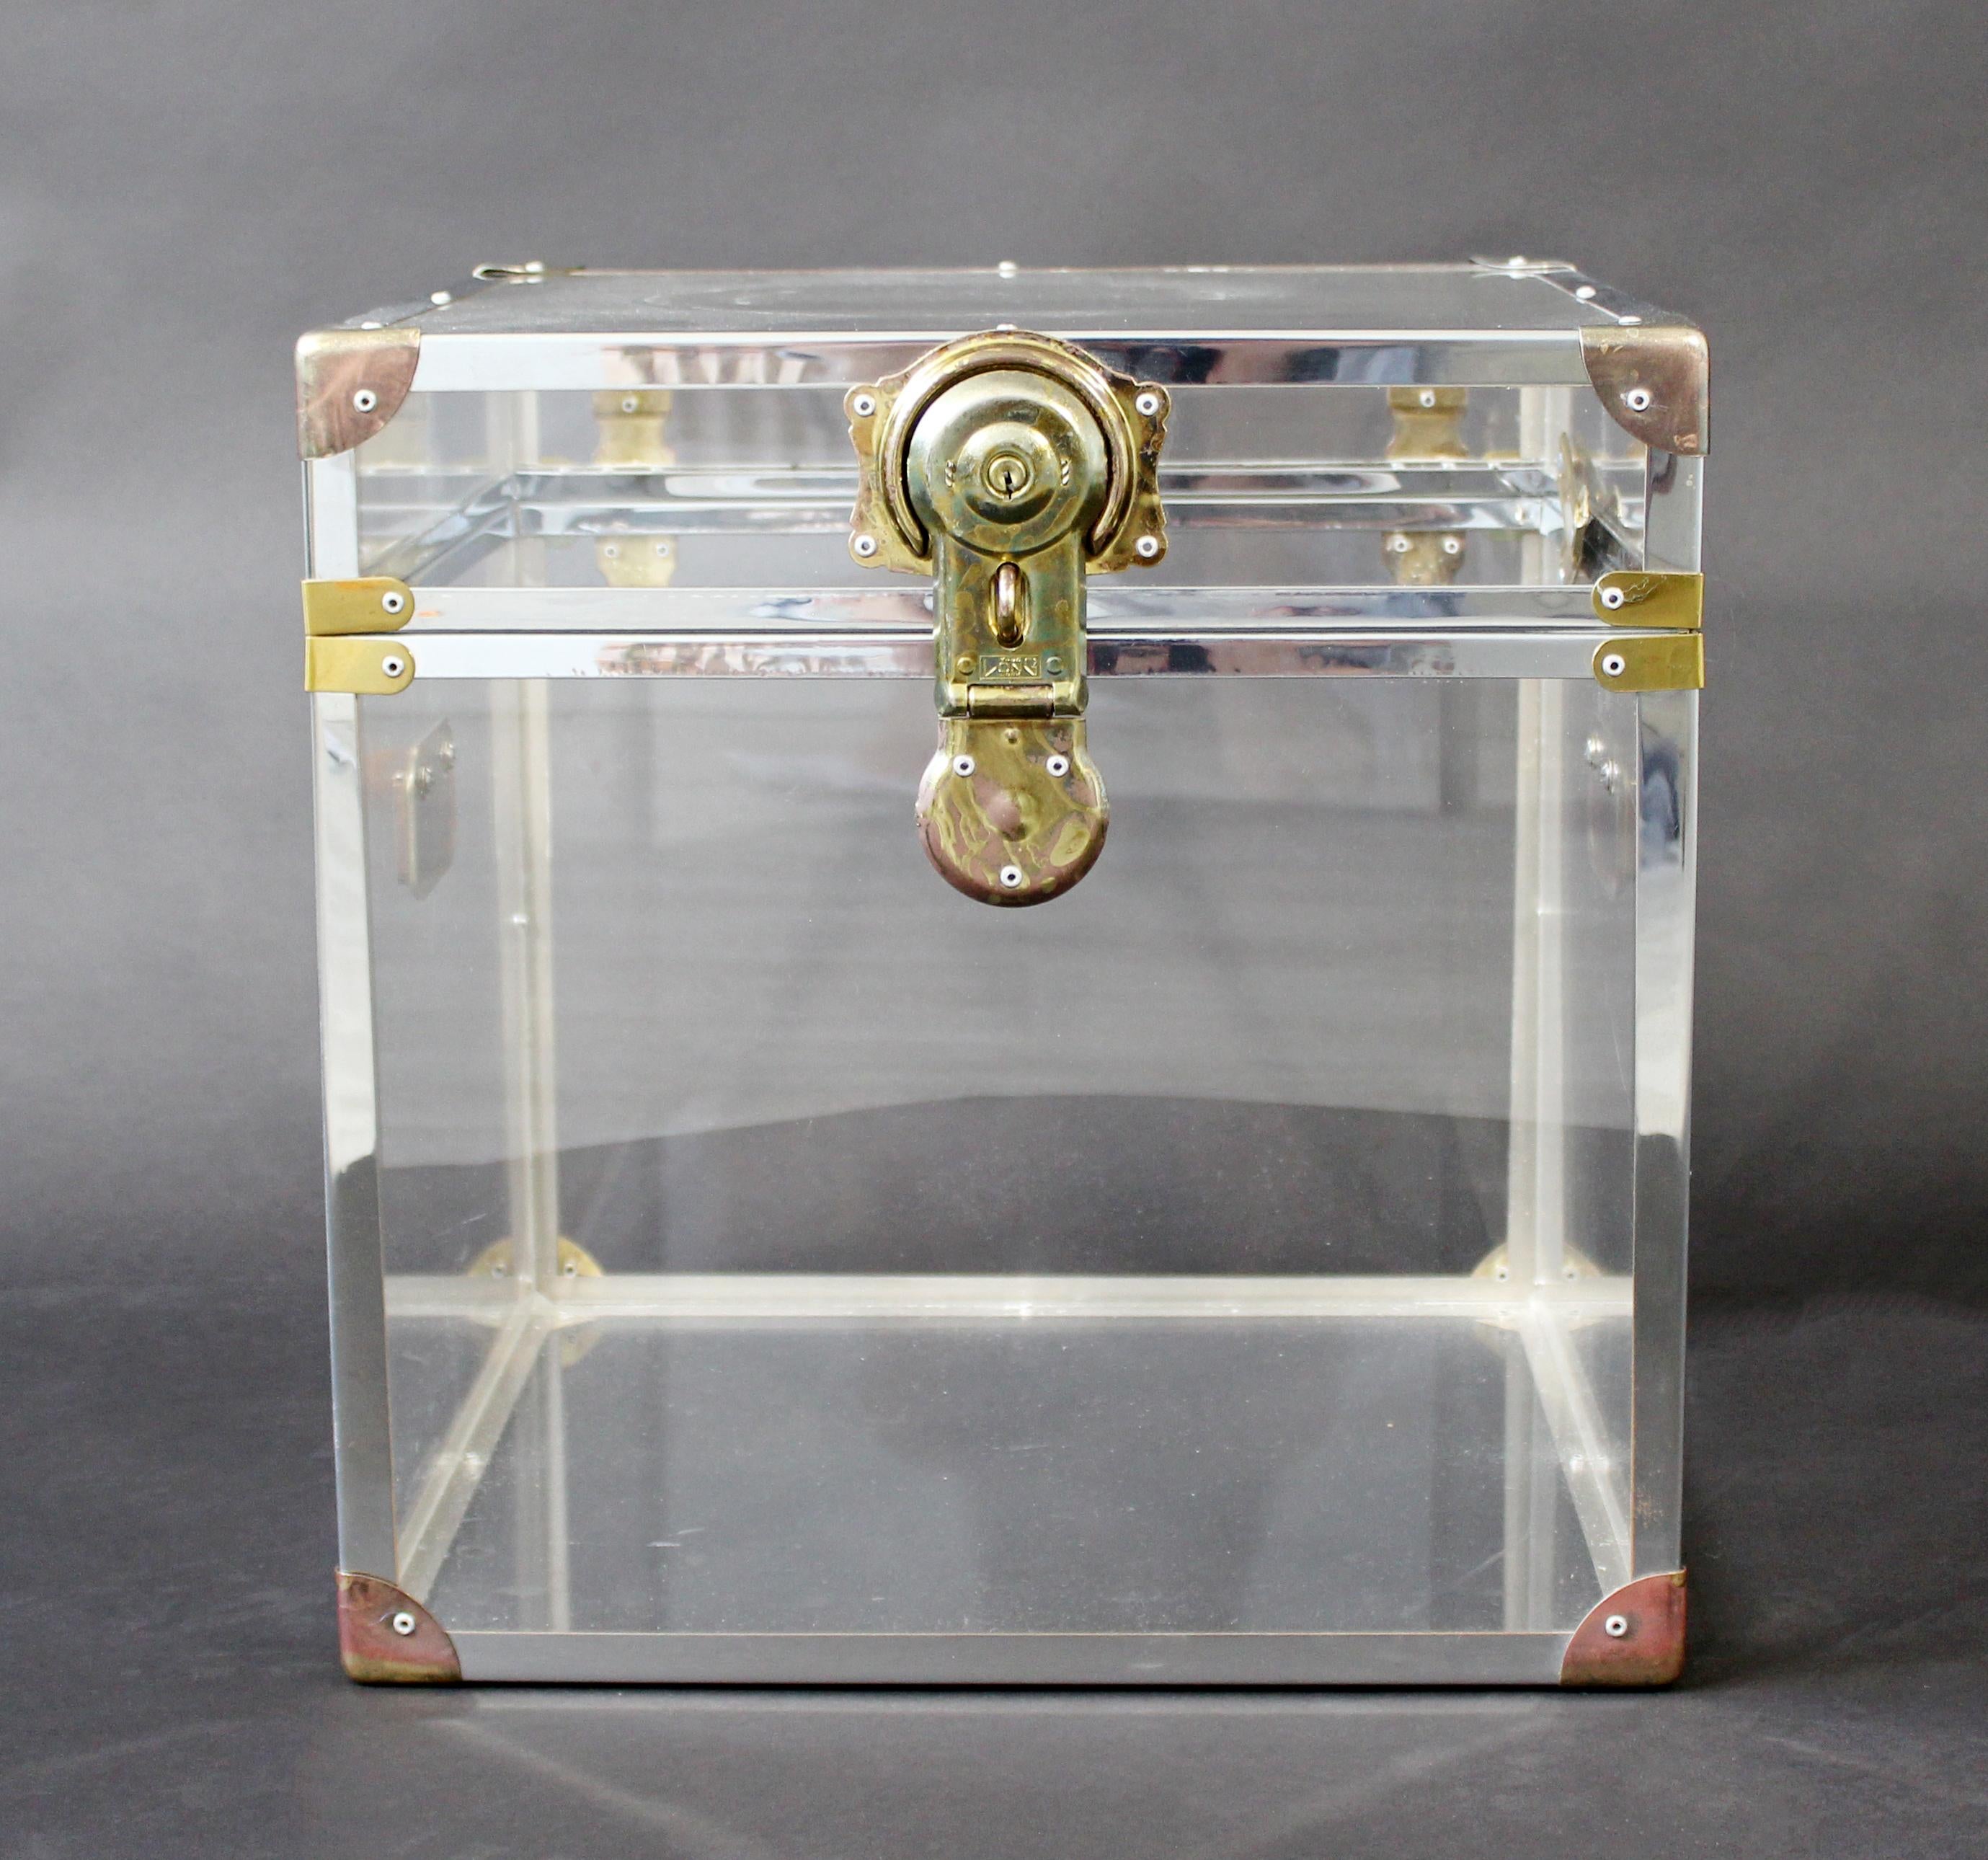 For your consideration is a fabulously chic side or end table and cabinet, made of Lucite with brass accents, circa the 1970s. In excellent vintage condition. The dimensions are 16